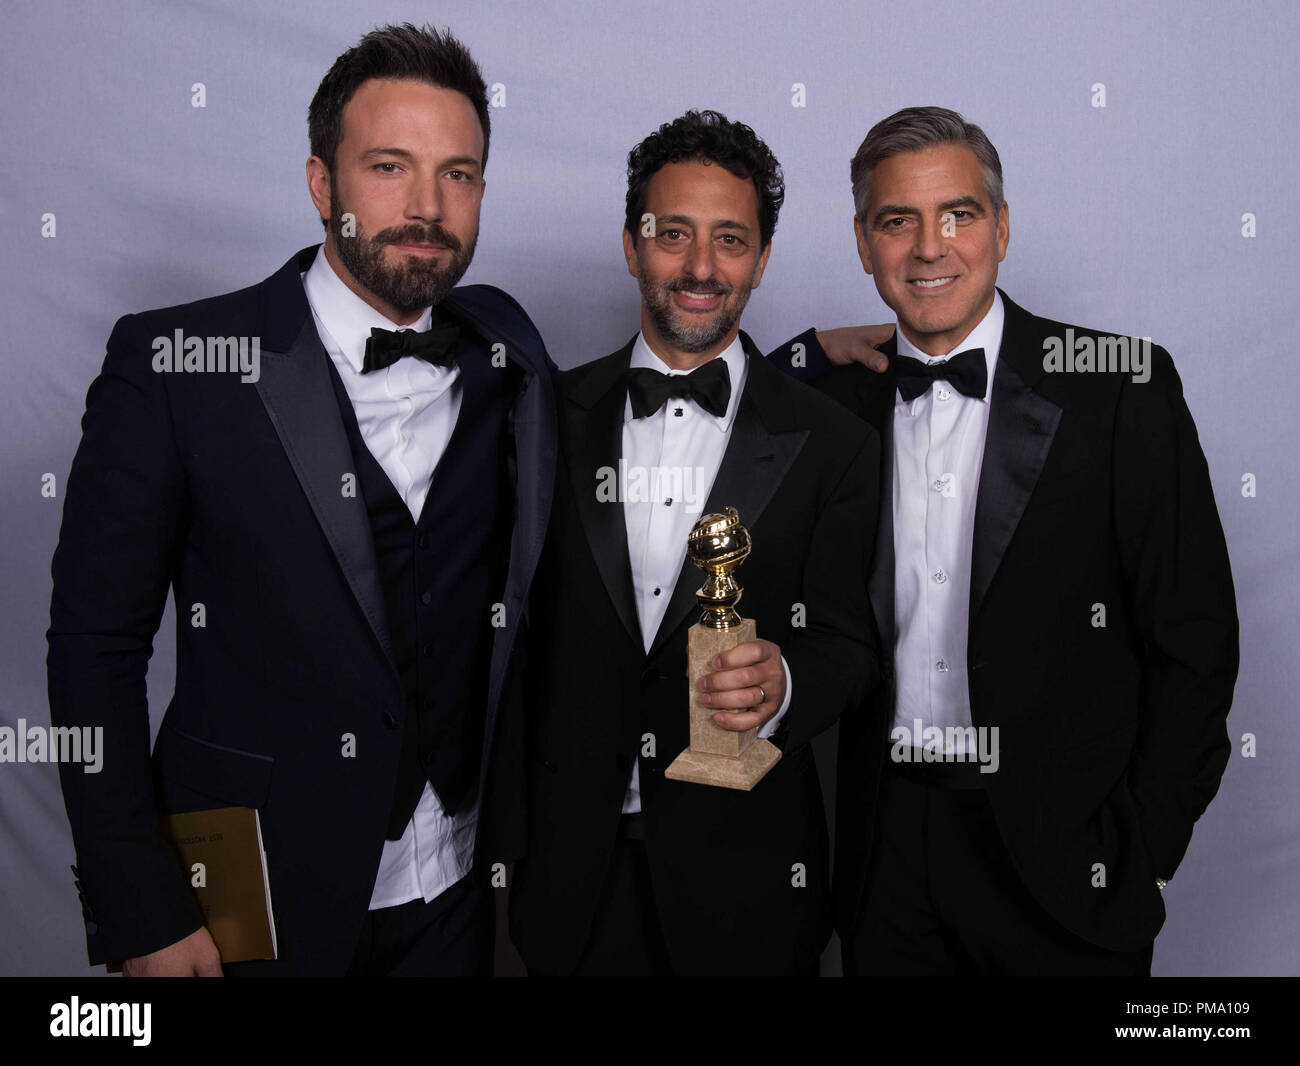 For BEST MOTION PICTURE – DRAMA, the Golden Globe is awarded to “ARGO”, produced by Warner Bros. Pictures, GK Films, Smokehouse Pictures; Warner Bros. Pictures. producers Ben Affleck, Grant Heslov and George Clooney pose with the award backstage in the press room at the 70th Annual Golden Globe Awards at the Beverly Hilton in Beverly Hills, CA on Sunday, January 13, 2013. Stock Photo